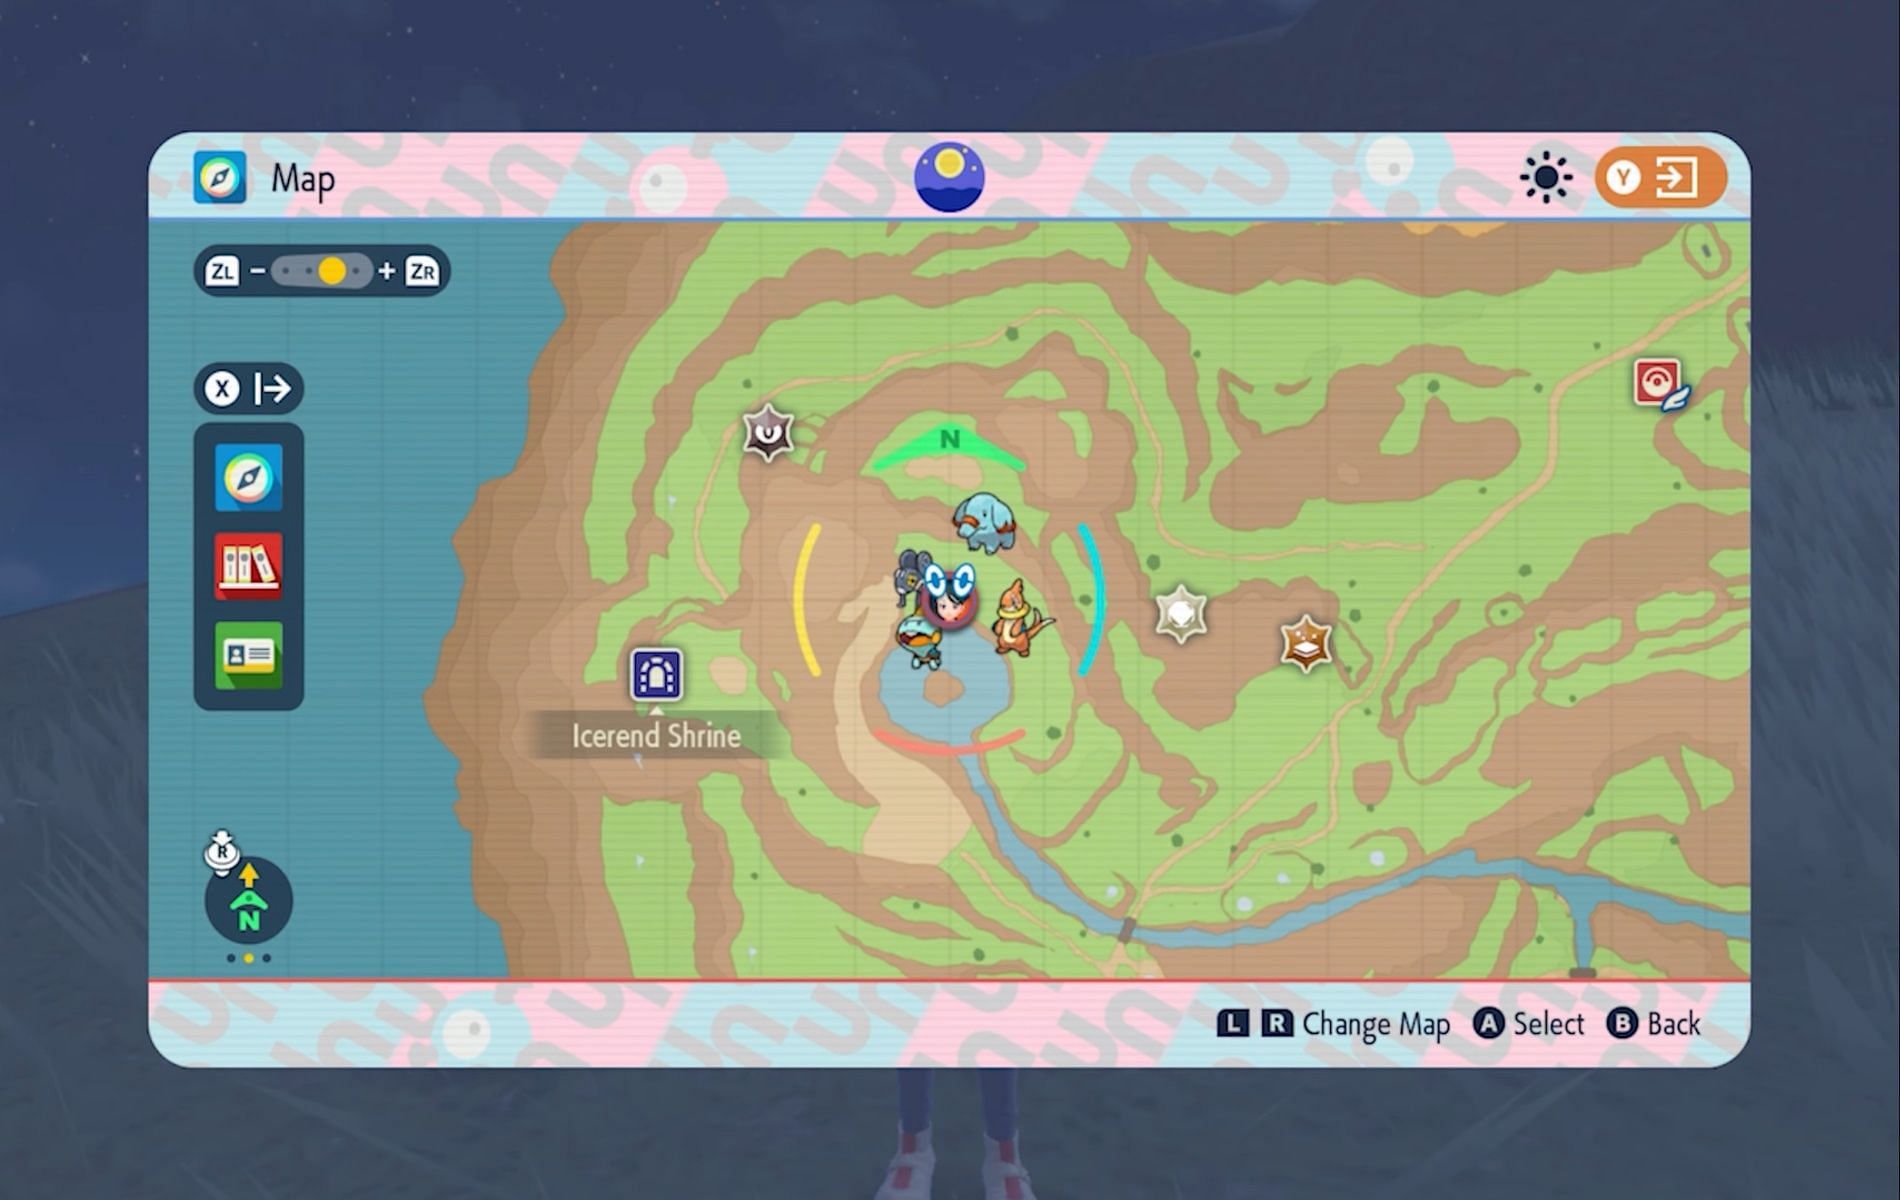 You can find Raikou in the Indigo Disk to the east of Icerend Shrine (Image via The Pokemon Company)